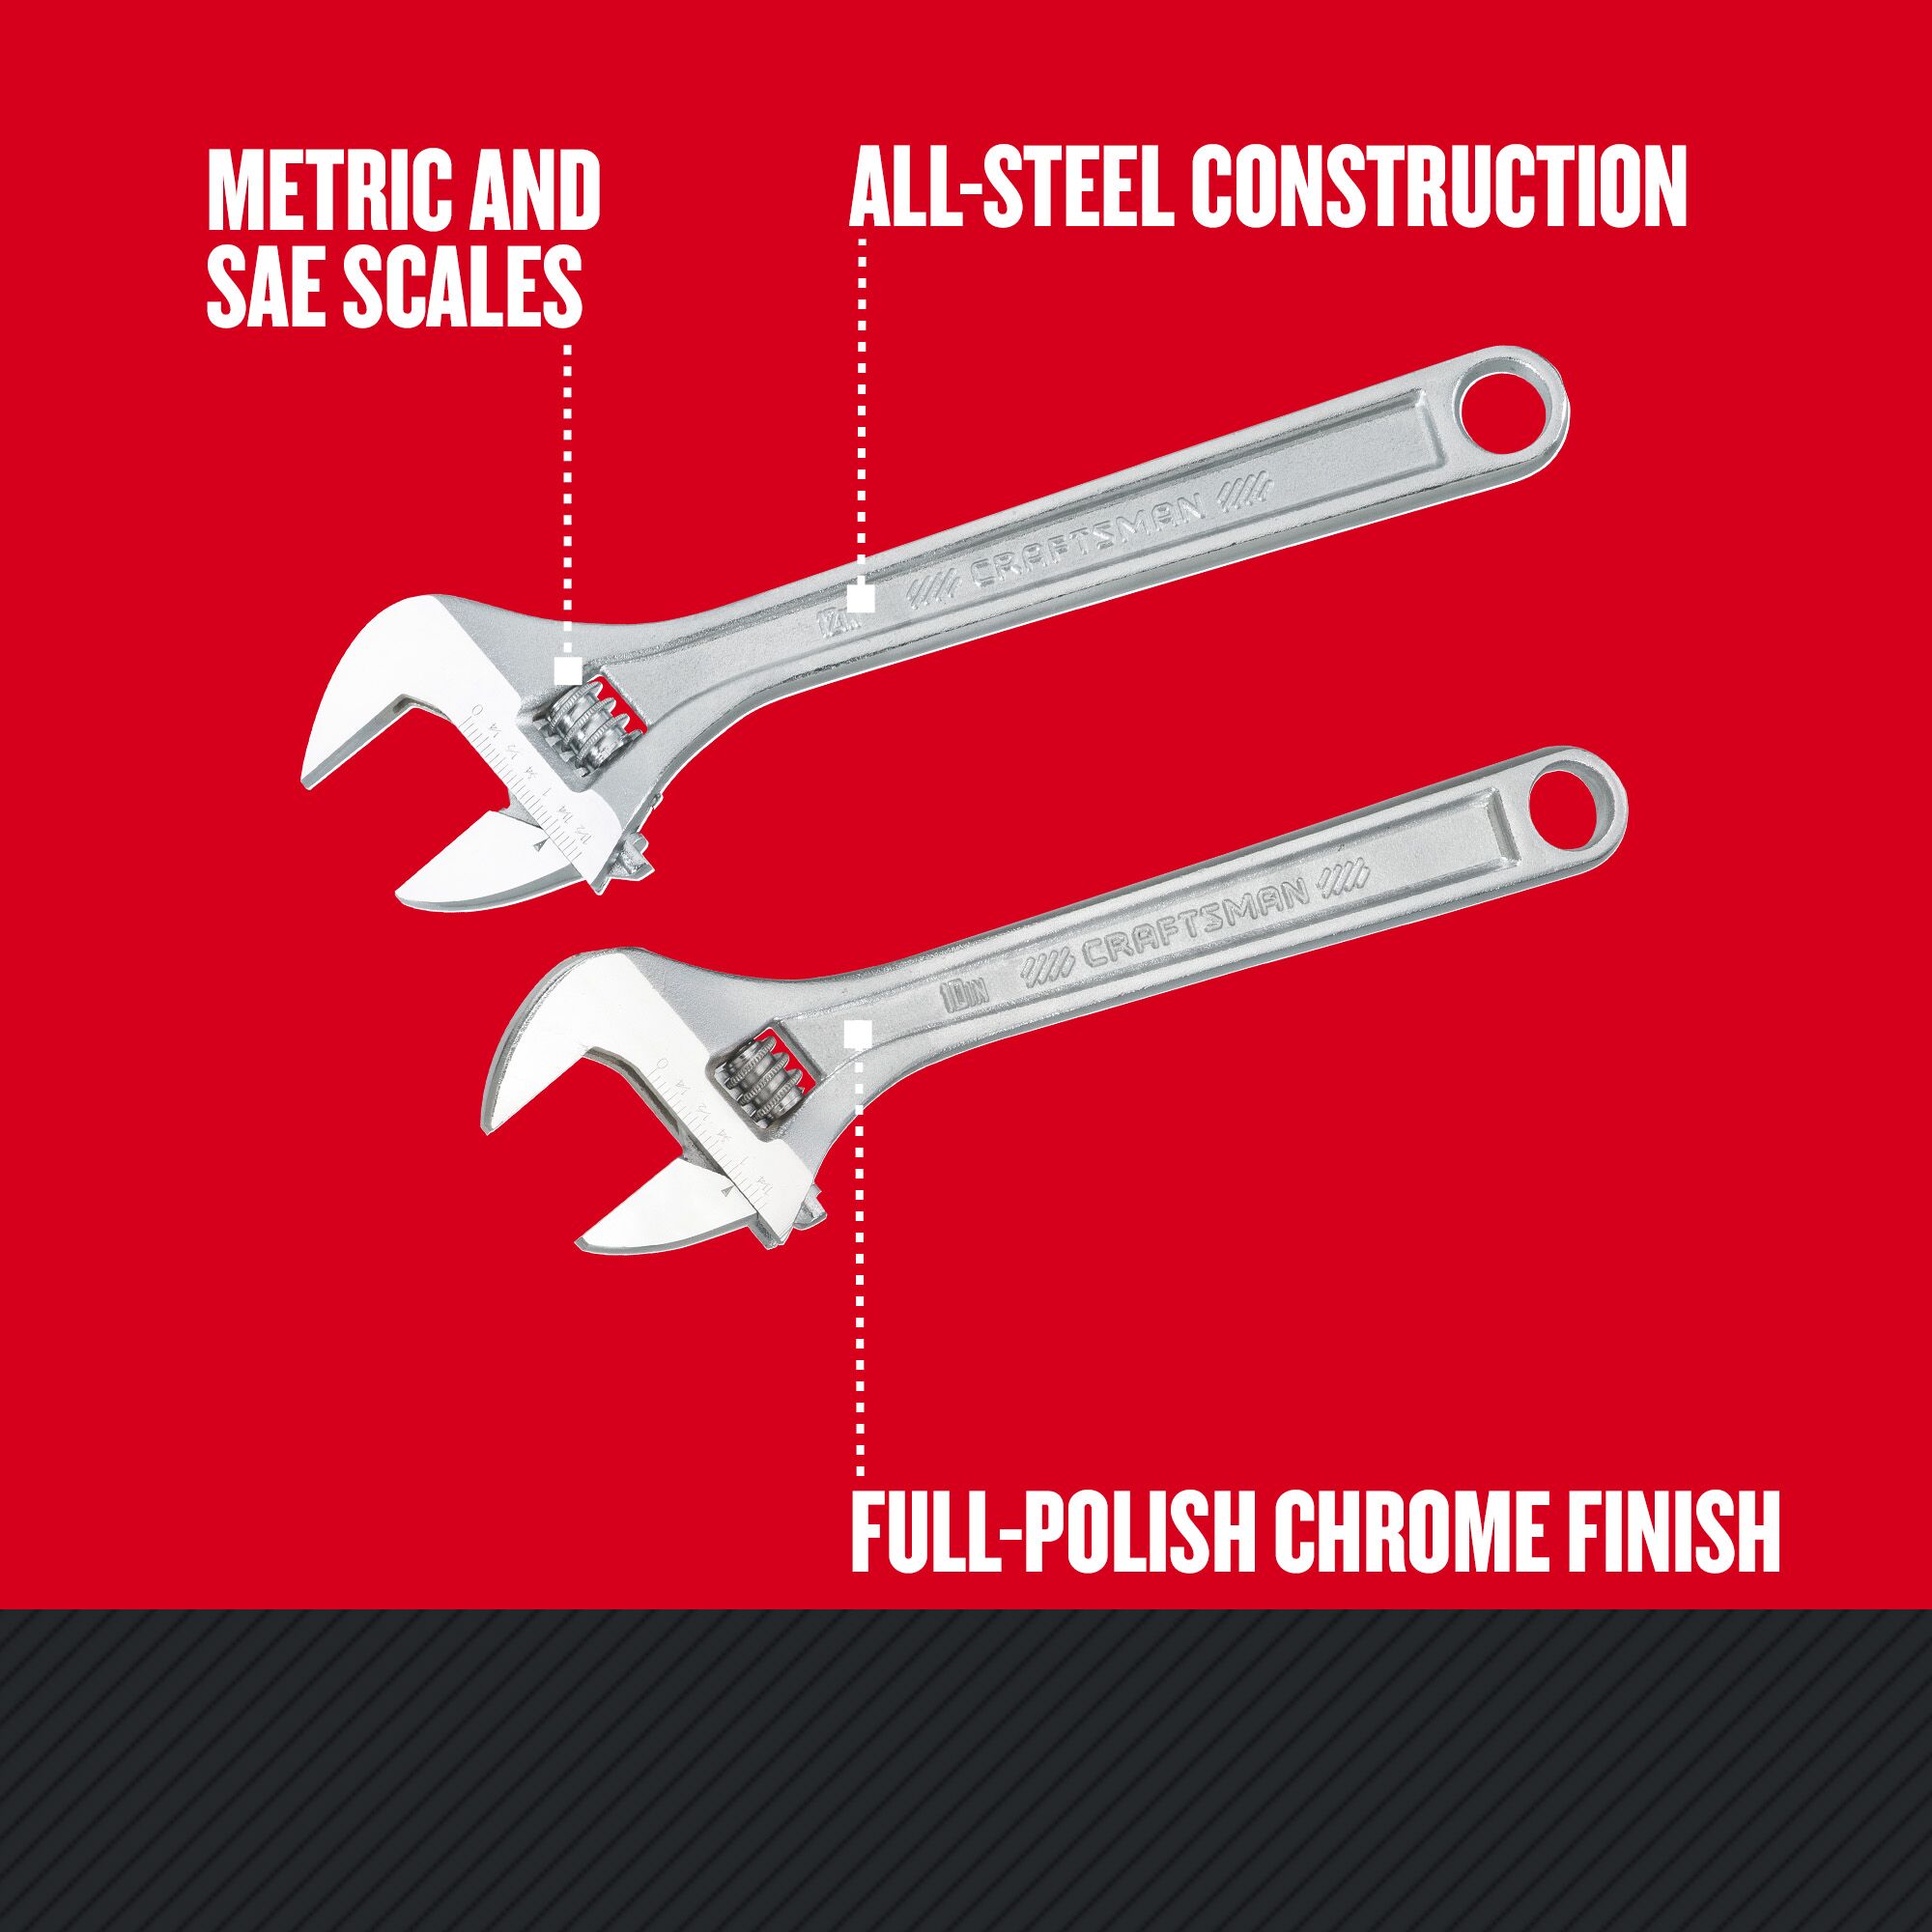 Graphic of CRAFTSMAN Wrenches: Adjustable highlighting product features